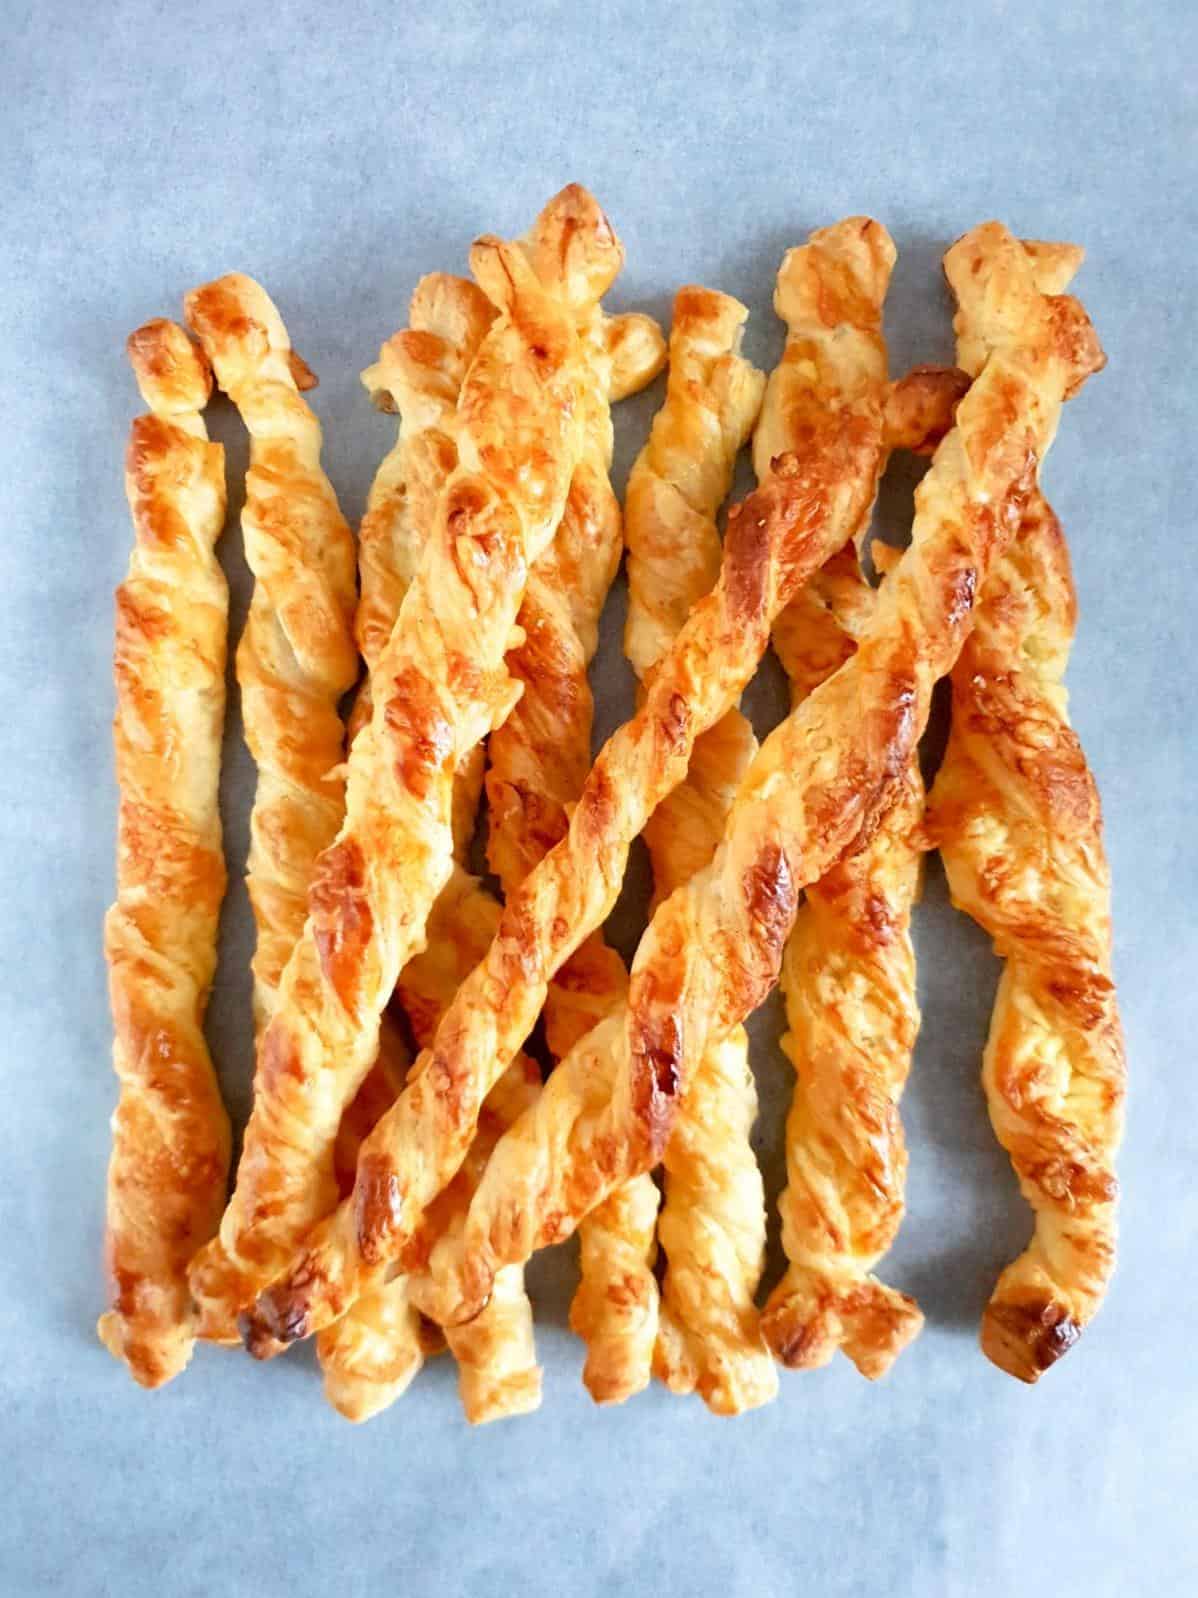  Satisfy your craving for a cheesy snack with these easy as pie cheese straws!